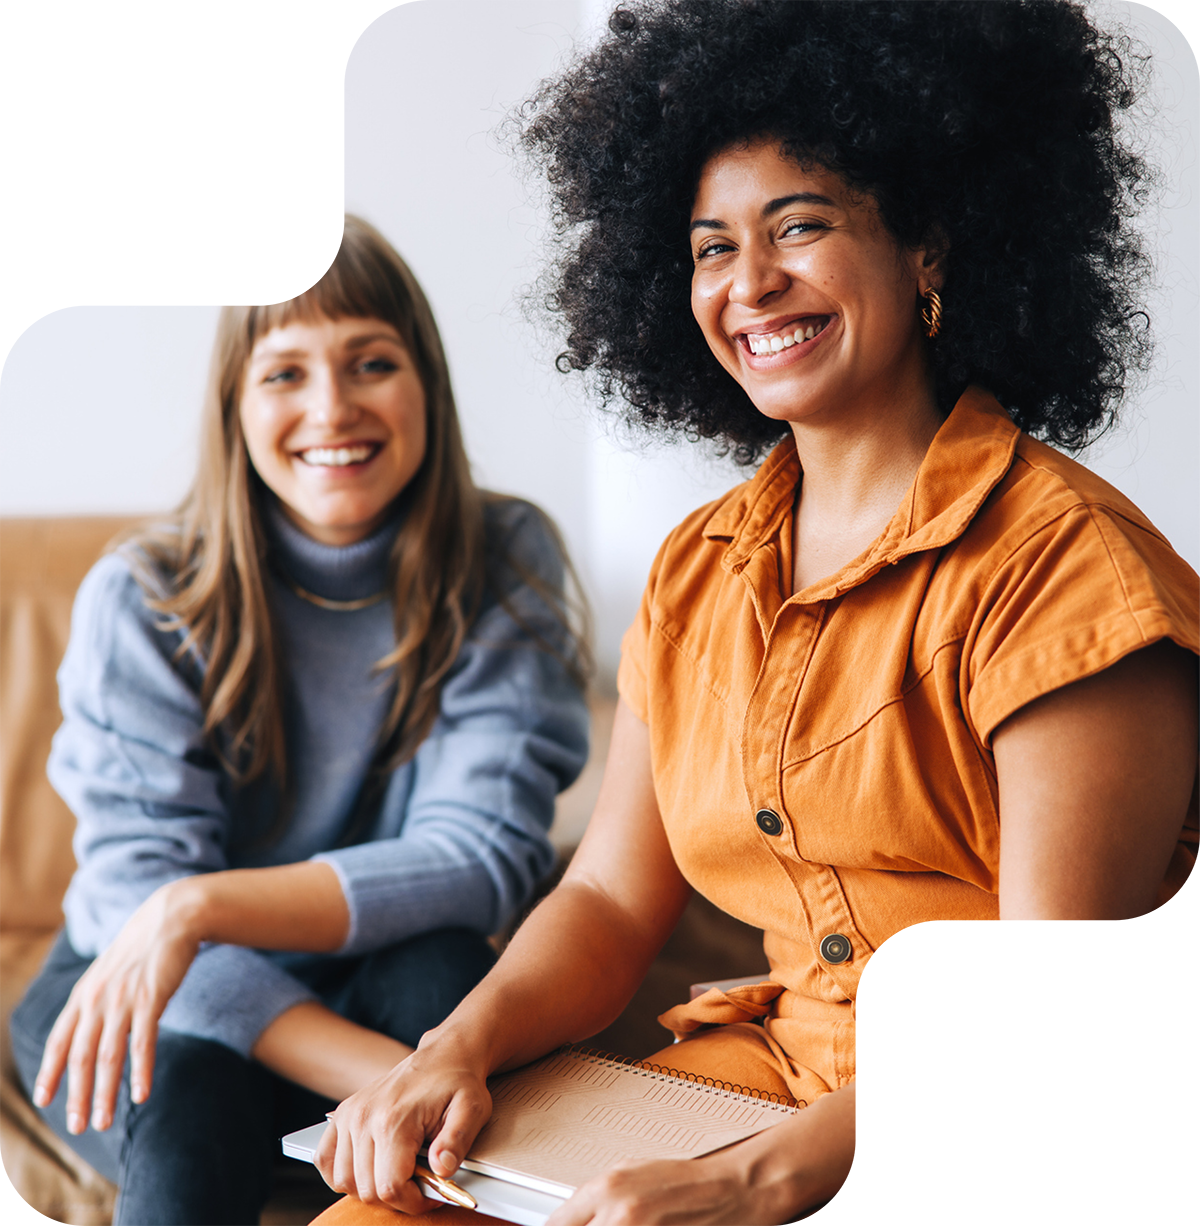 Black young woman in the workplace sitting next to a white woman smiling as friends and peers